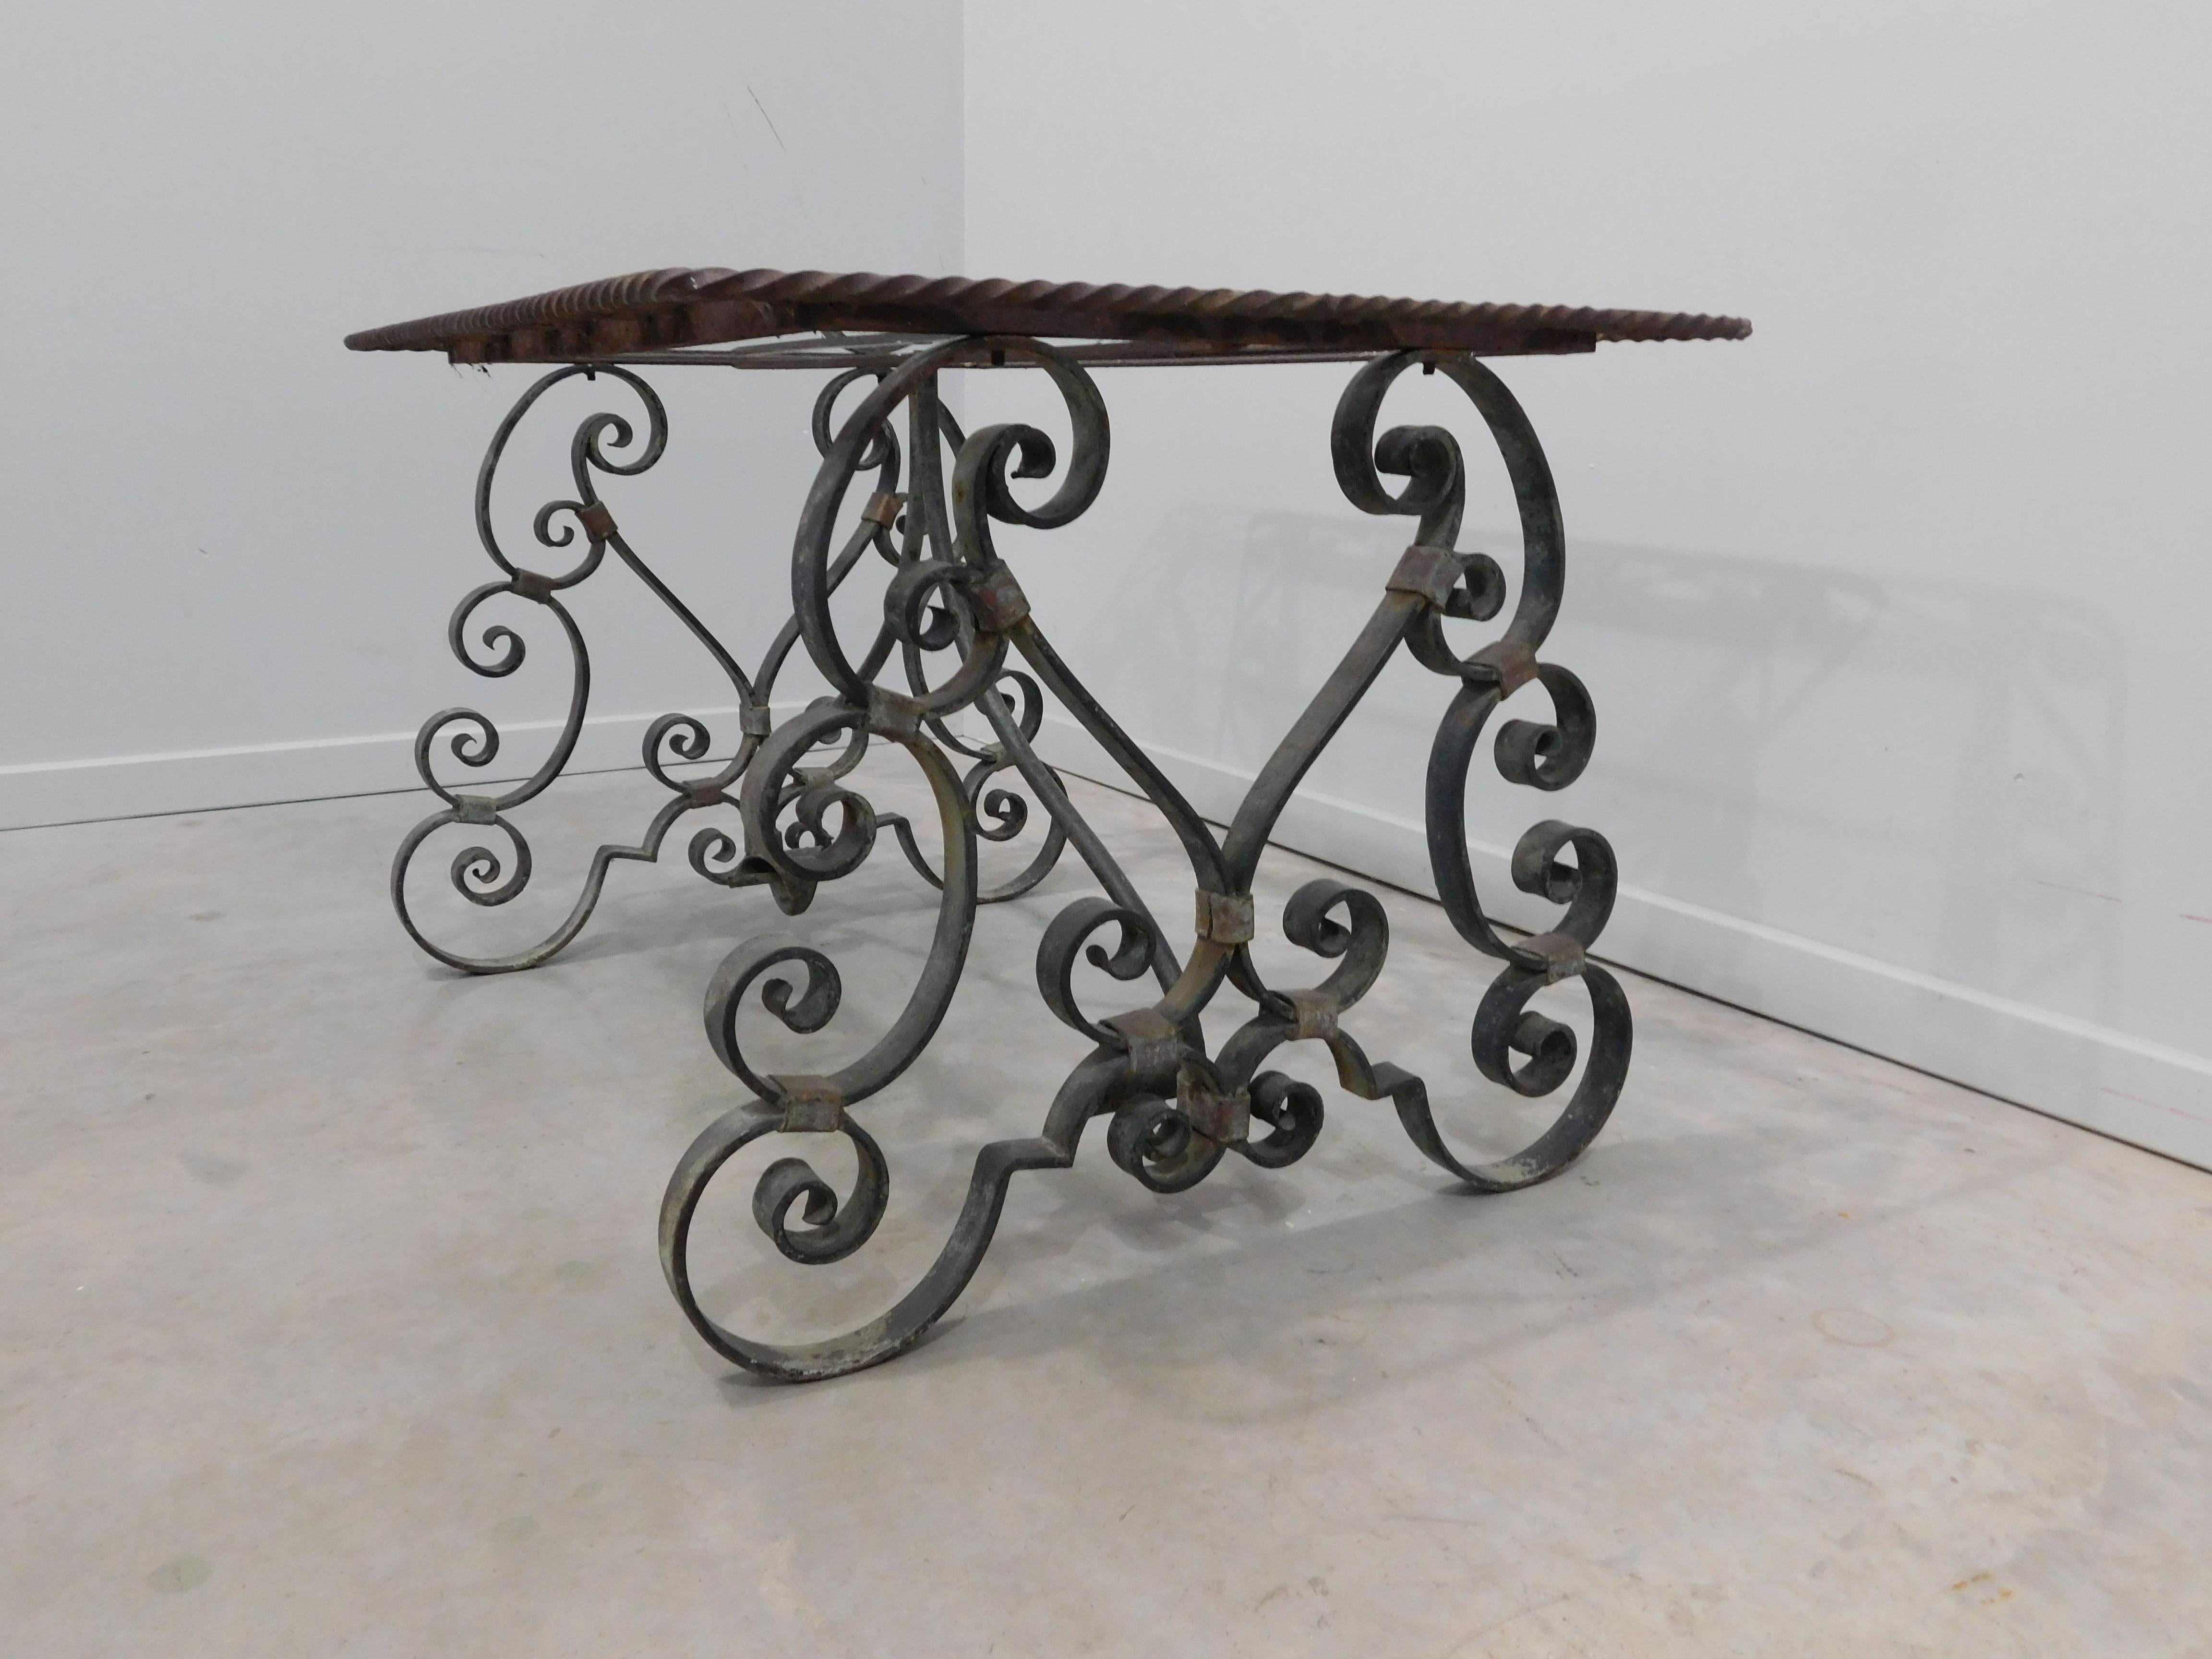 French Provincial verde green wrought iron occasional or coffee table. Rectangular glass top table within c and s-scrolled hand-forged iron frame, supported on an elaborate hand-forged iron base with scrolled legs and spreaders.French Provincial or